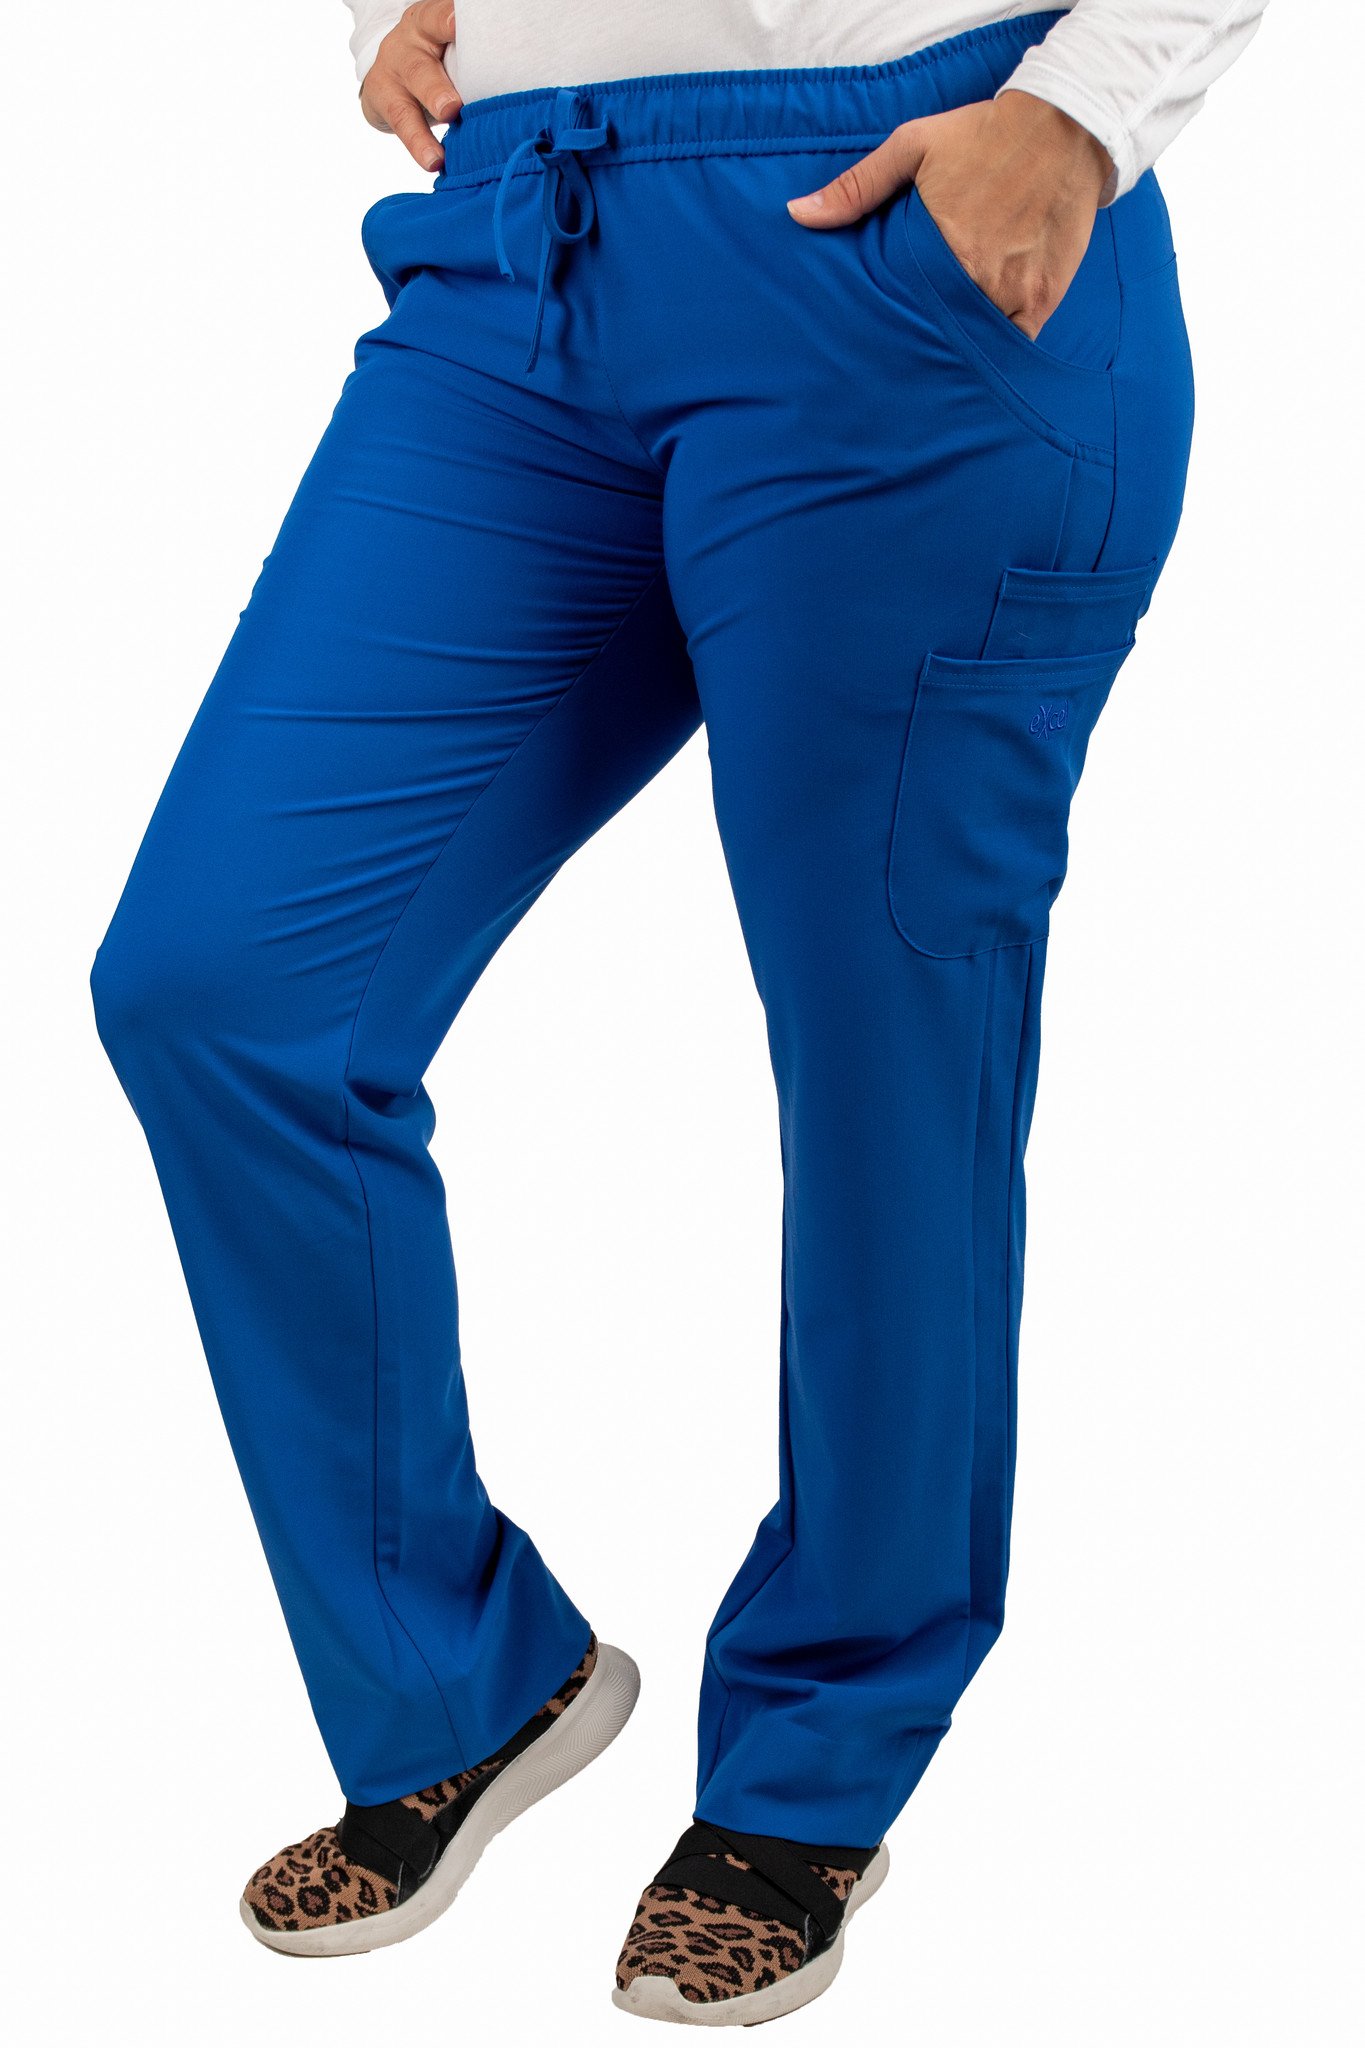 Royal Blue Women's Drawstring Waistband Fitted Pants 960